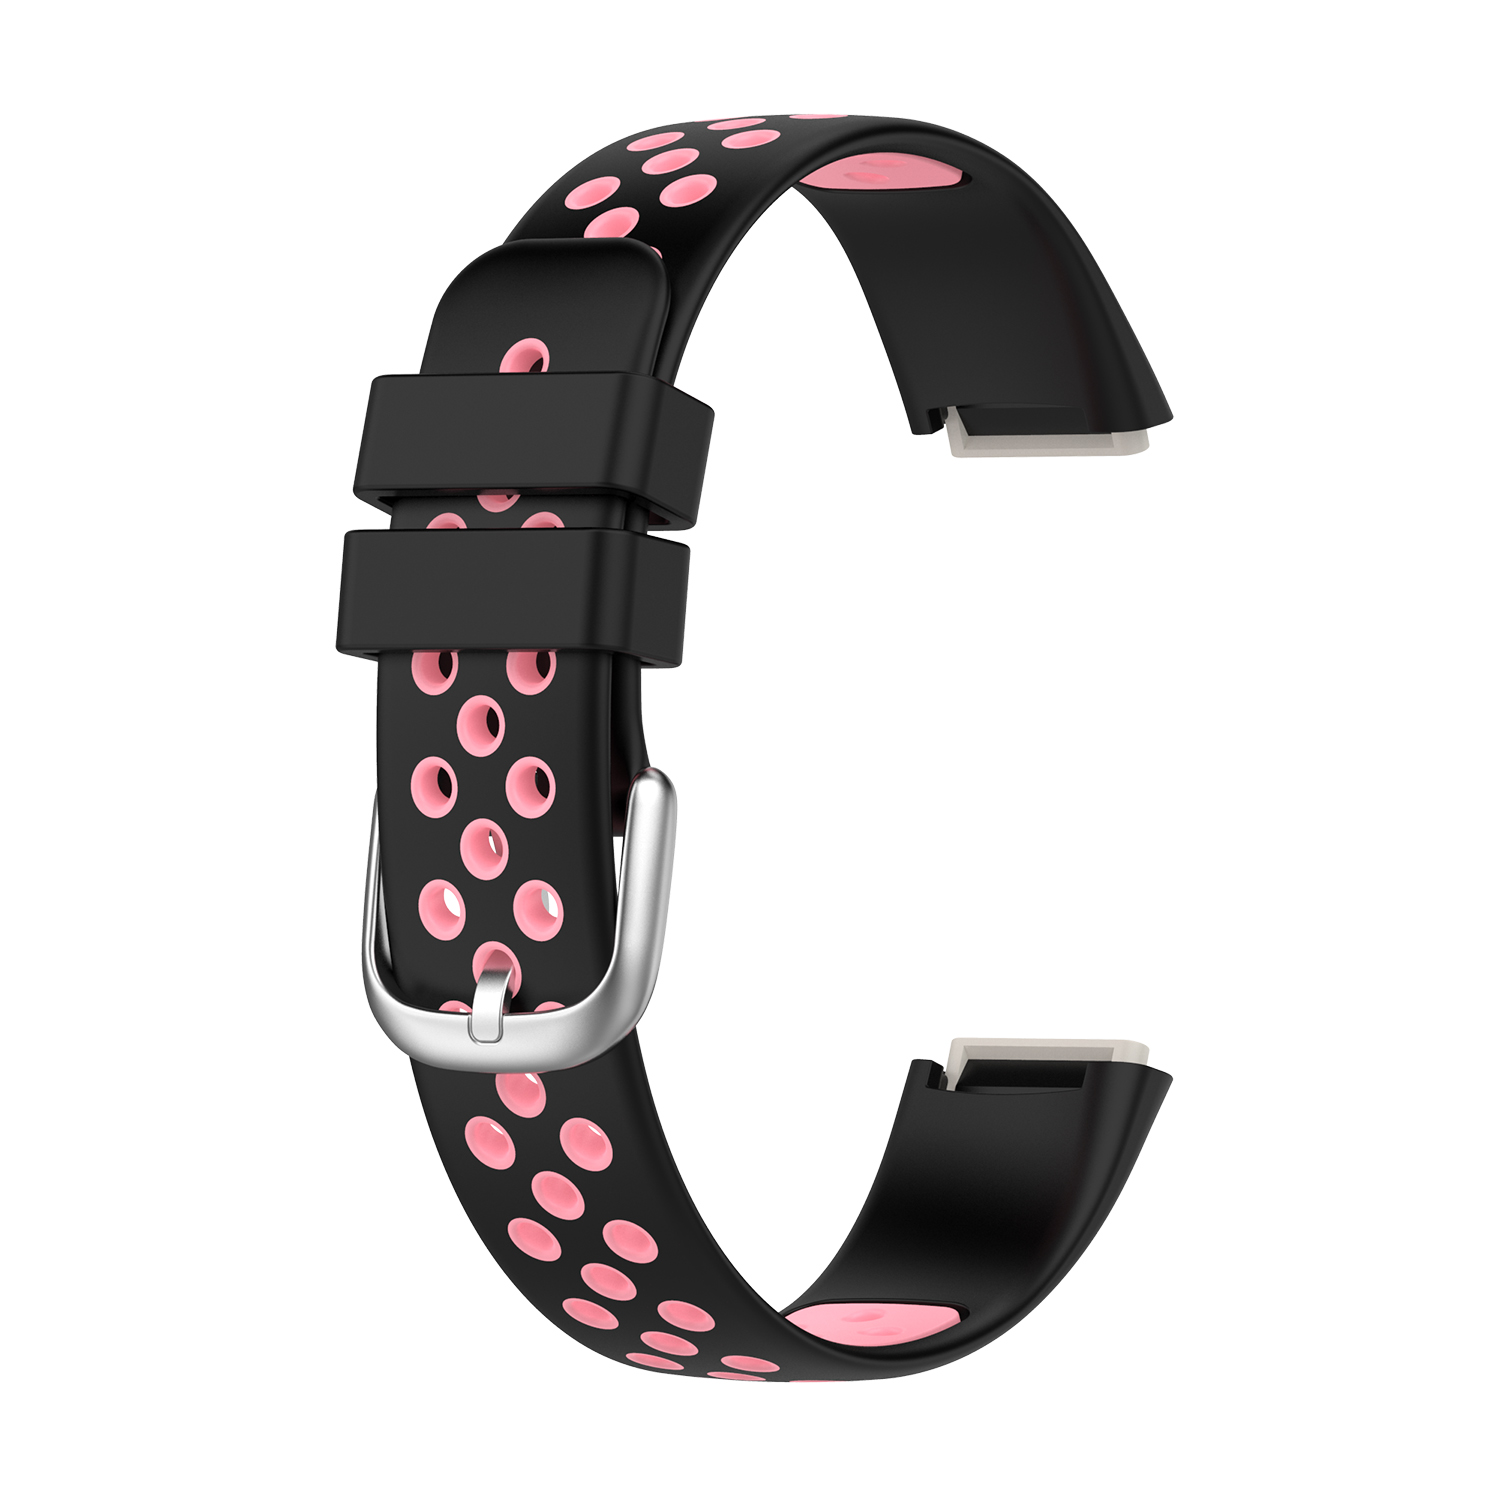 Bakeey-Double-Color-Pattern-Breathable-Sweatproof-Soft-Silicone-Watch-Band-Strap-Replacement-for-Fit-1886285-19